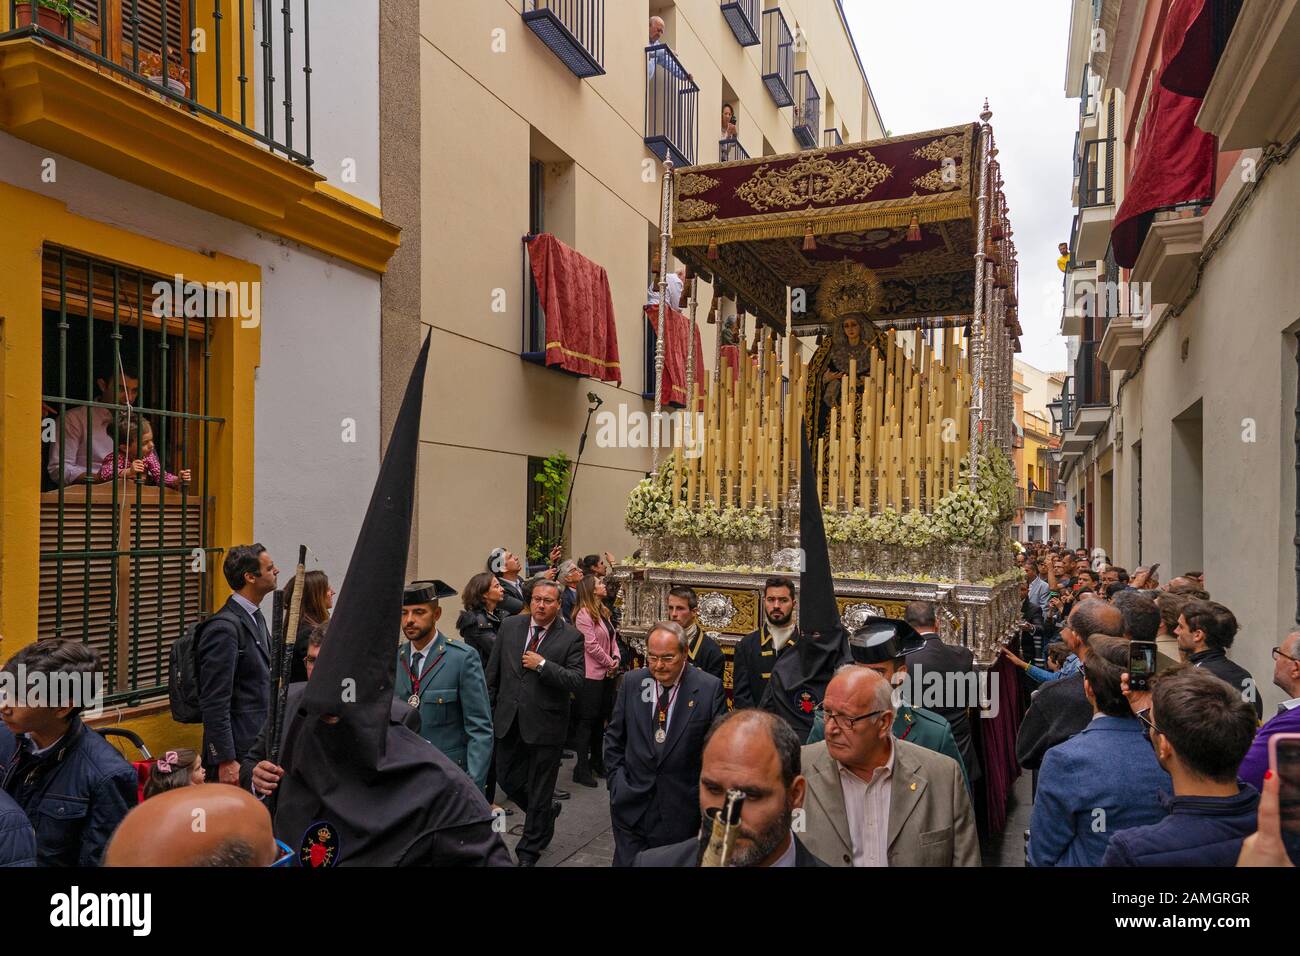 Semana santa , Easter religious parade event in Seville, Andalusia,Spain Stock Photo